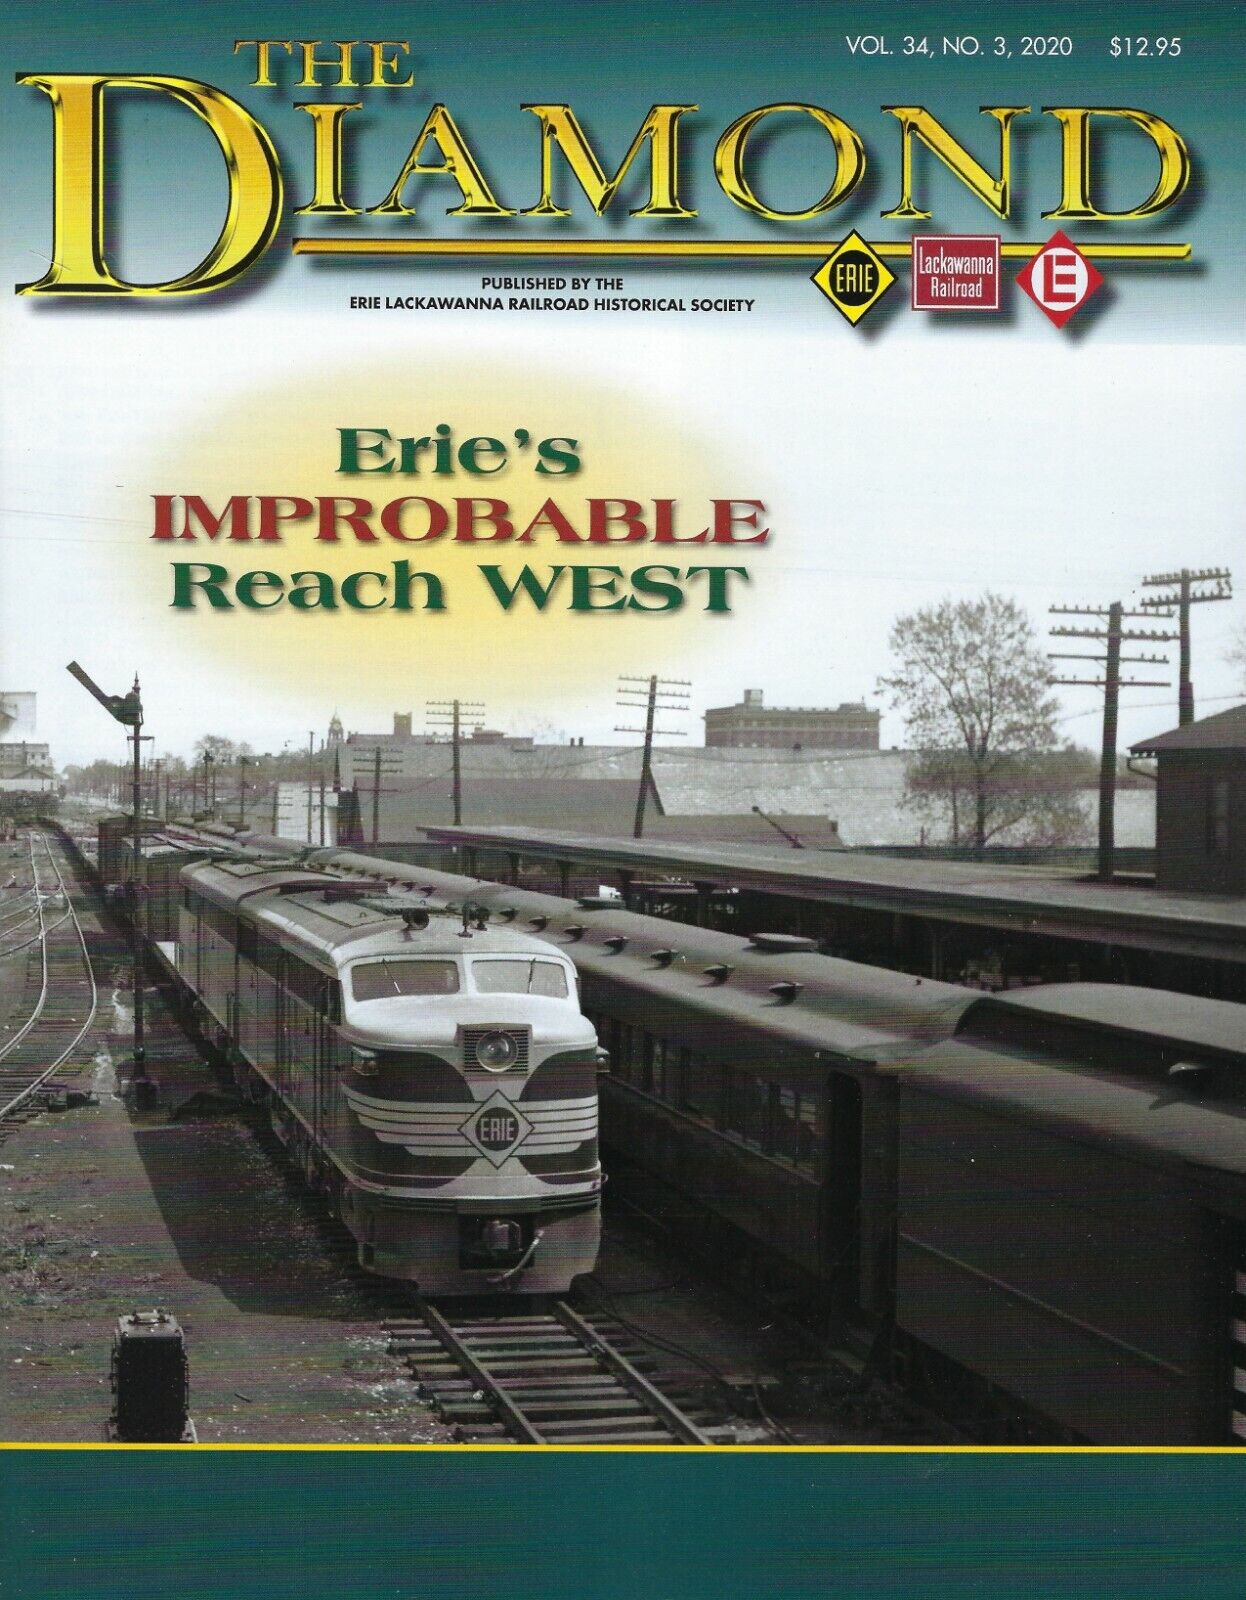 The Diamond: 3rd Qtr, 2020, ERIE LACKAWANNA Historical Society (BRAND NEW issue)